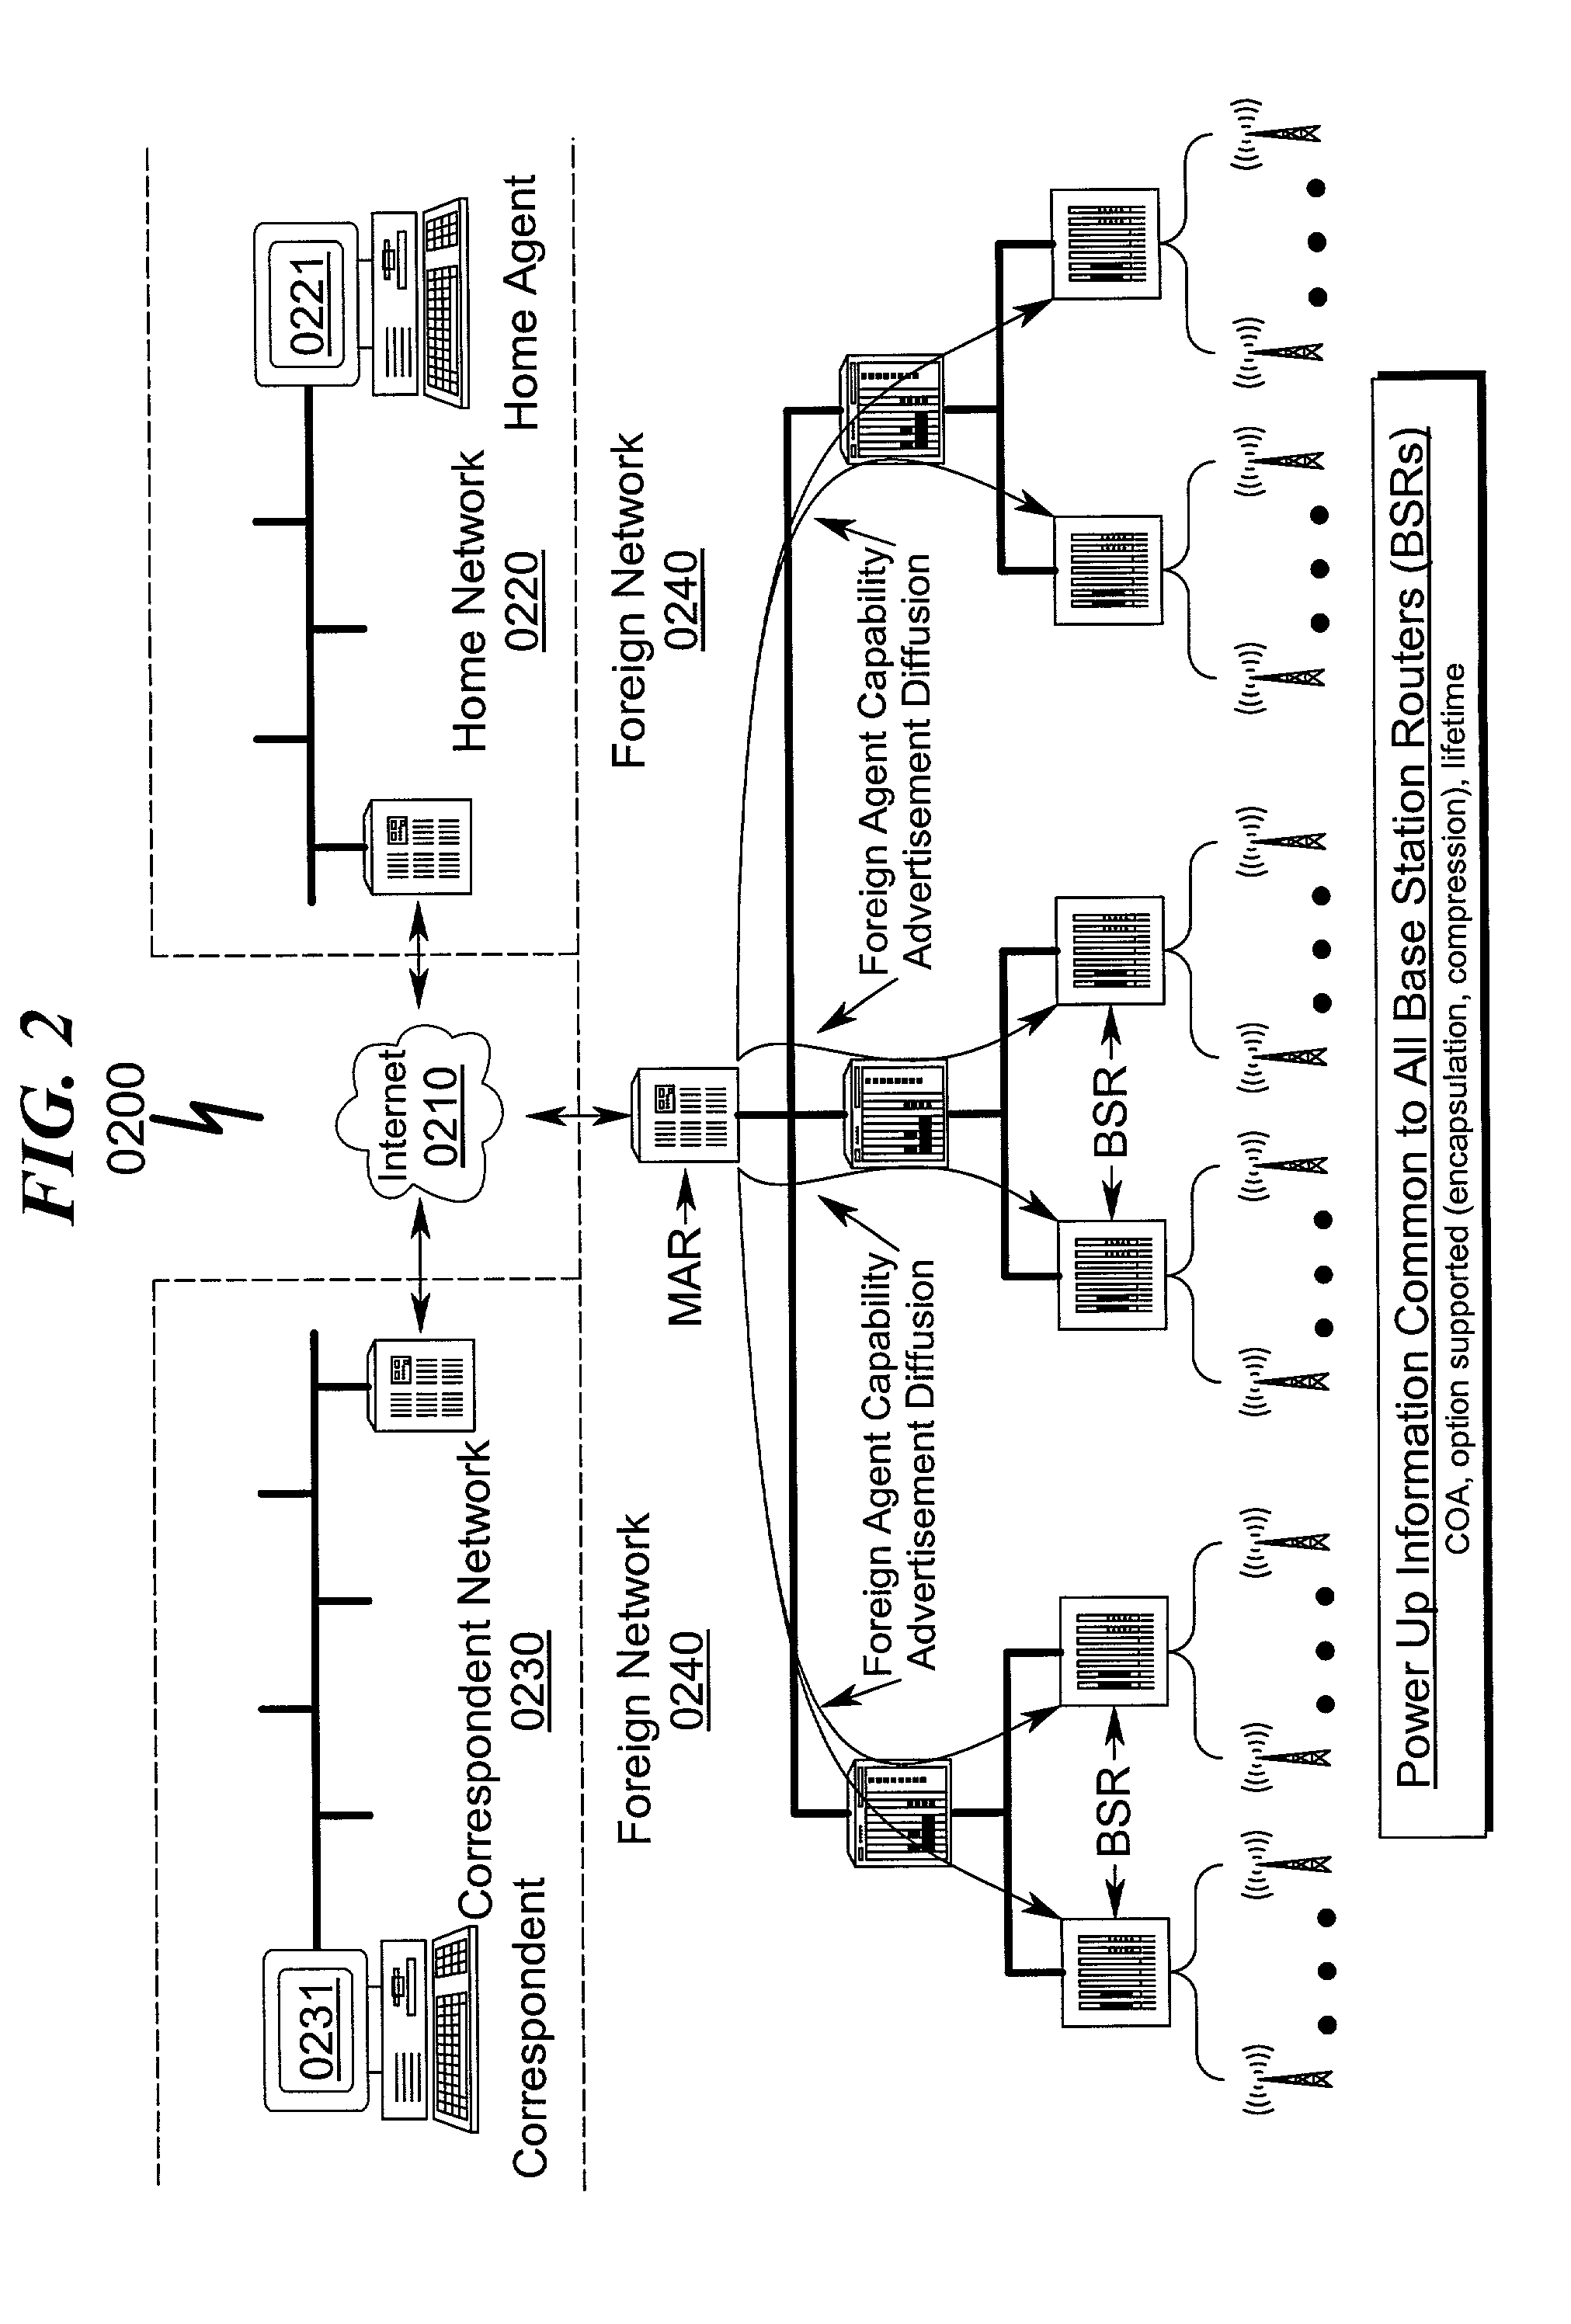 Micro-mobility network routing system and method